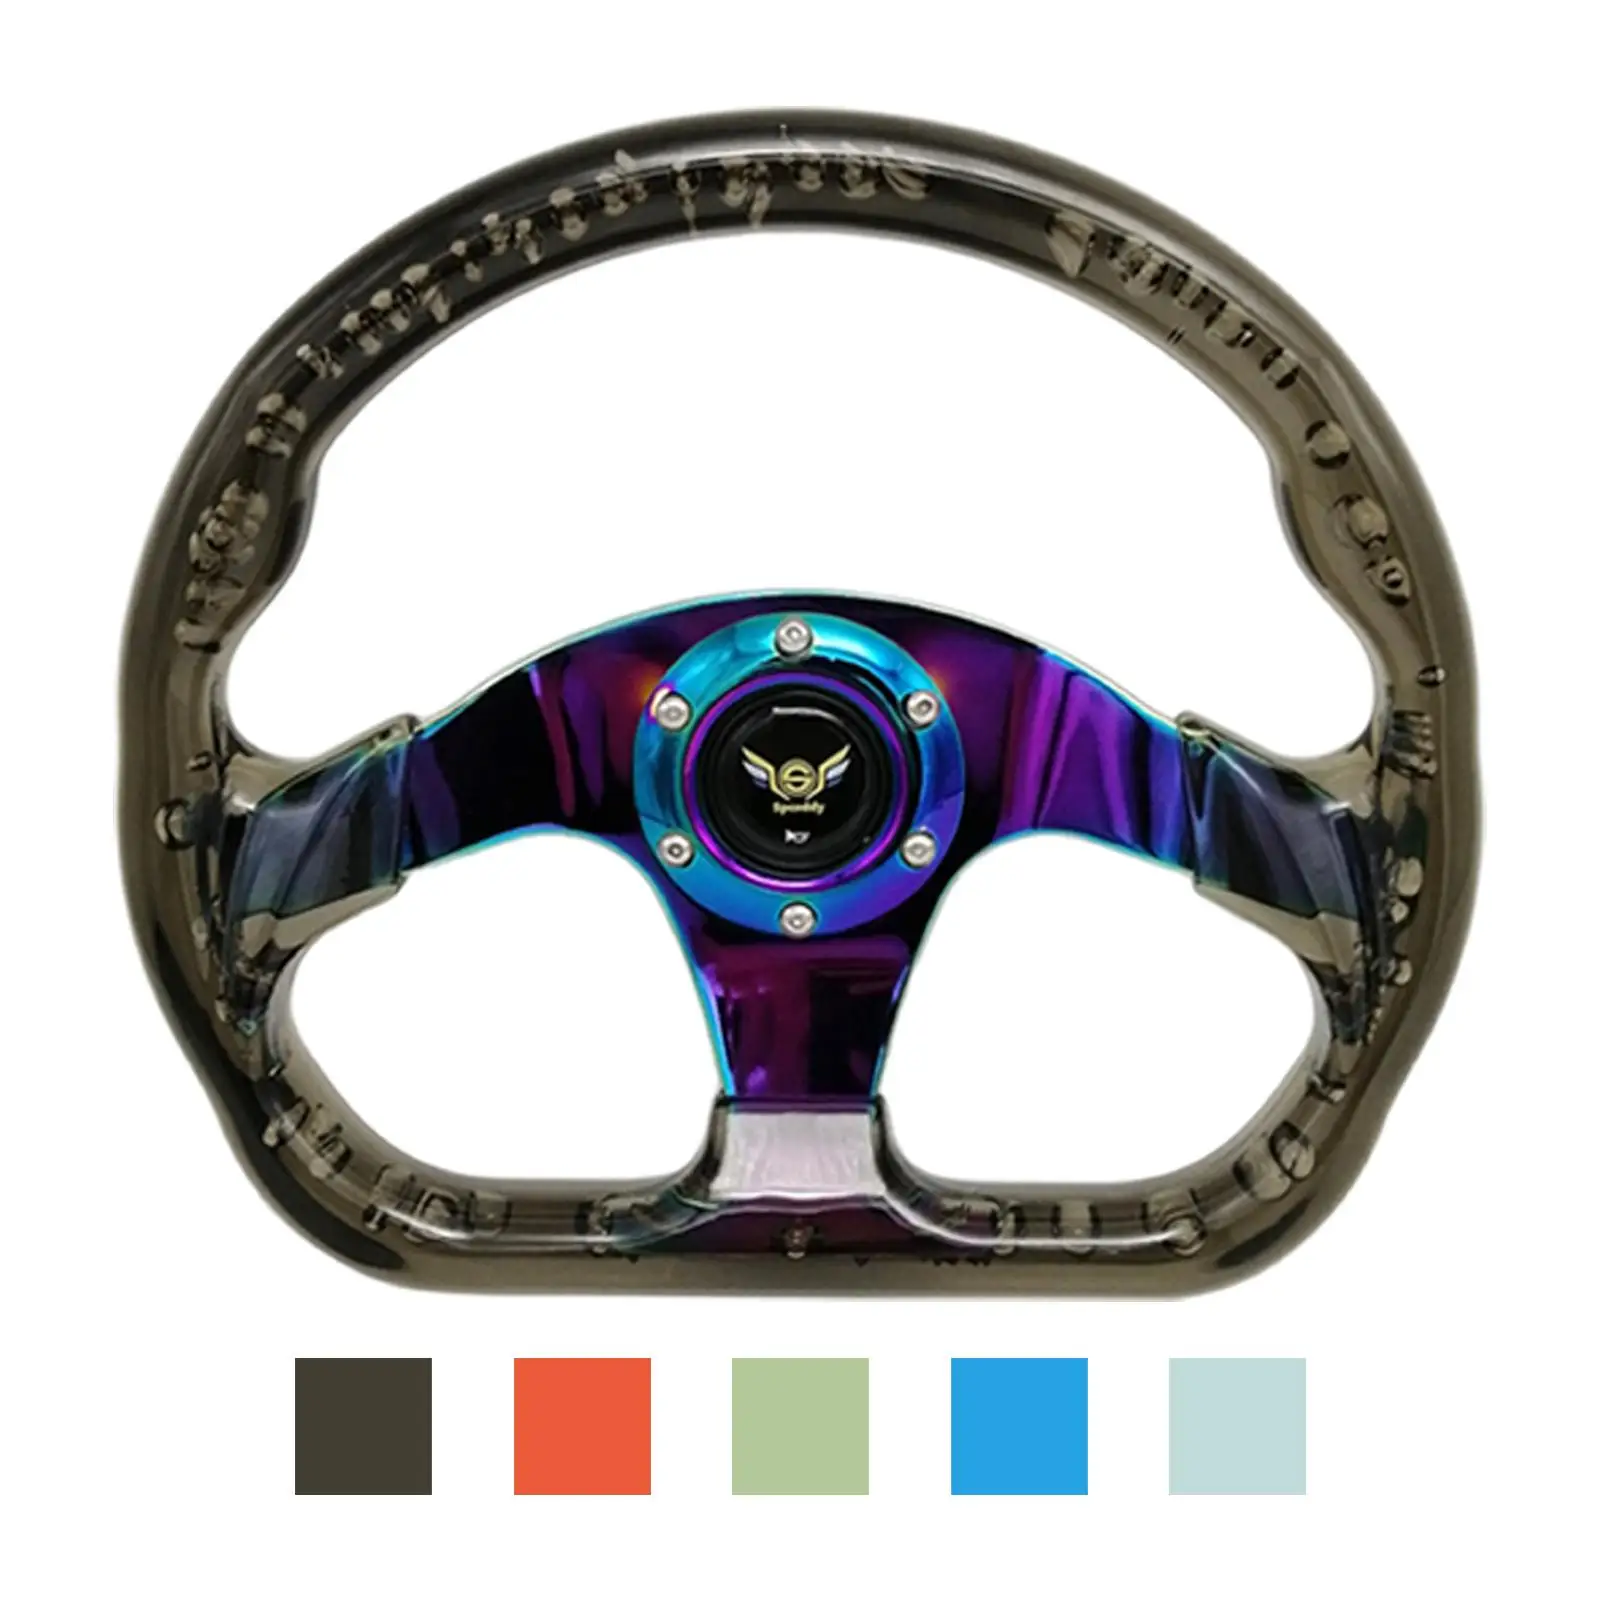 Universal D Shaped 13 inch 330mm Vehicle Steering Wheel Race Style for Race Car Modification Drifting Steering Wheel